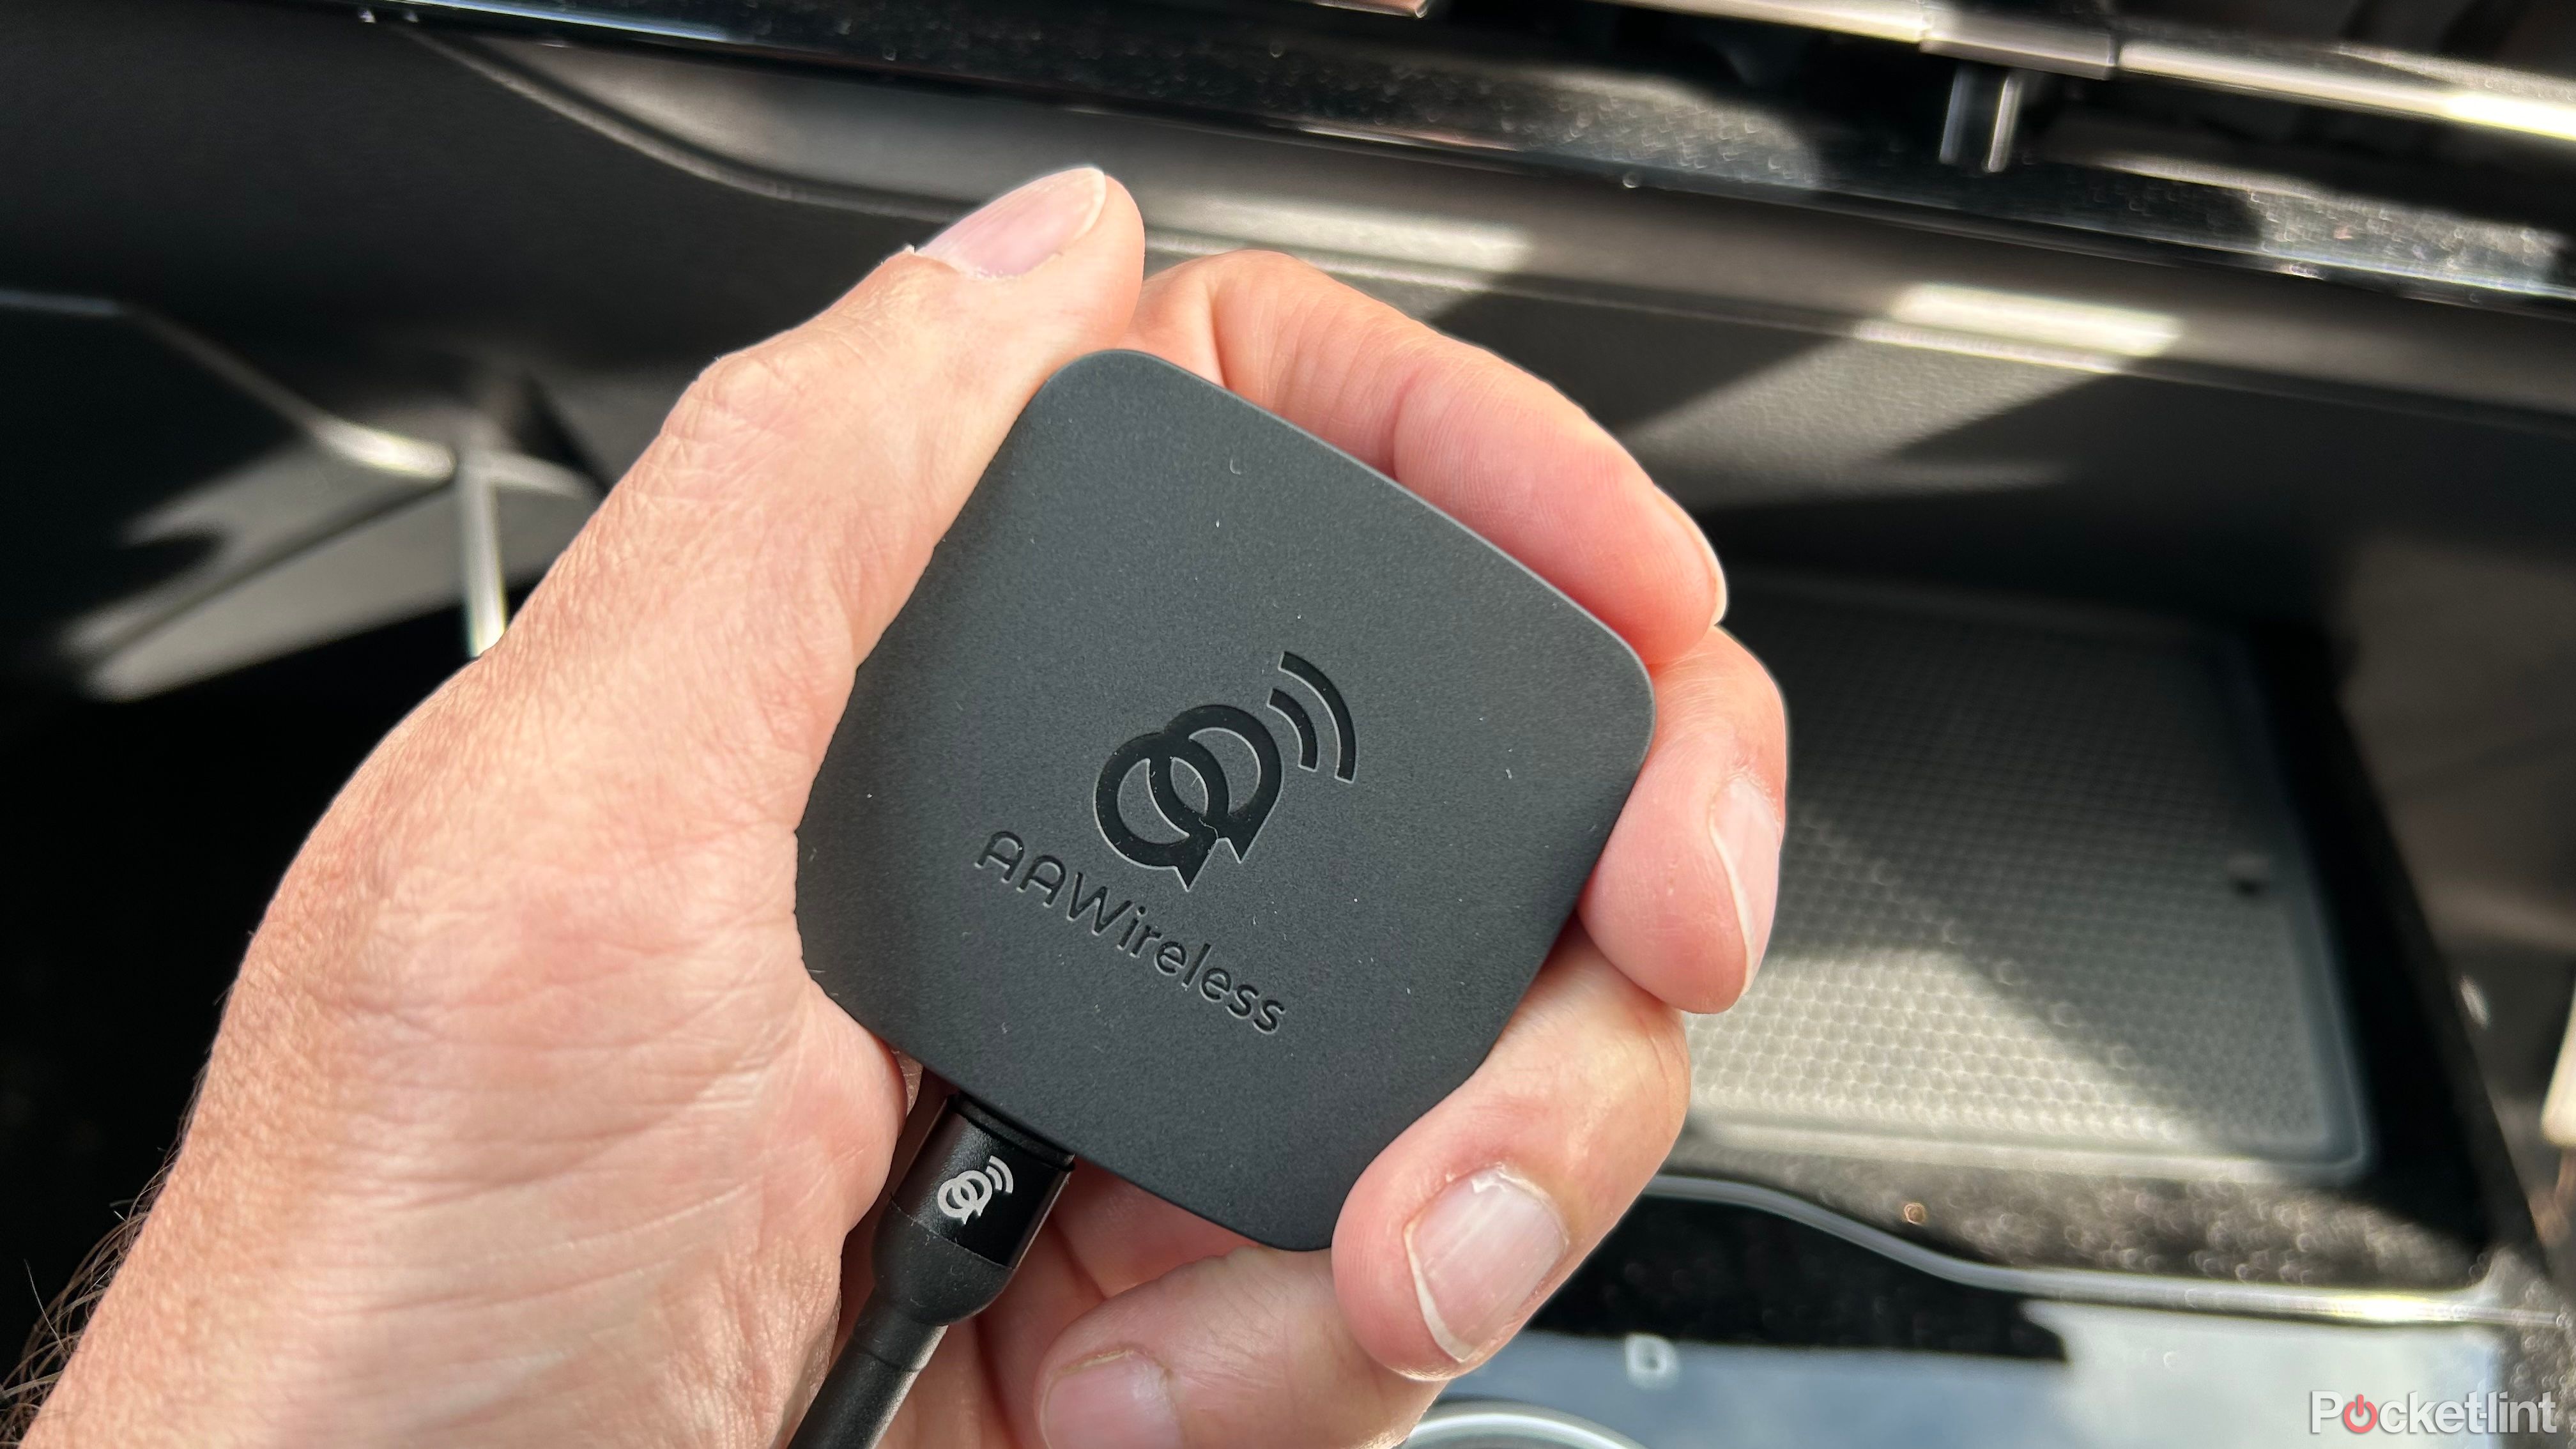 AA Wireless Dongle for Android Auto